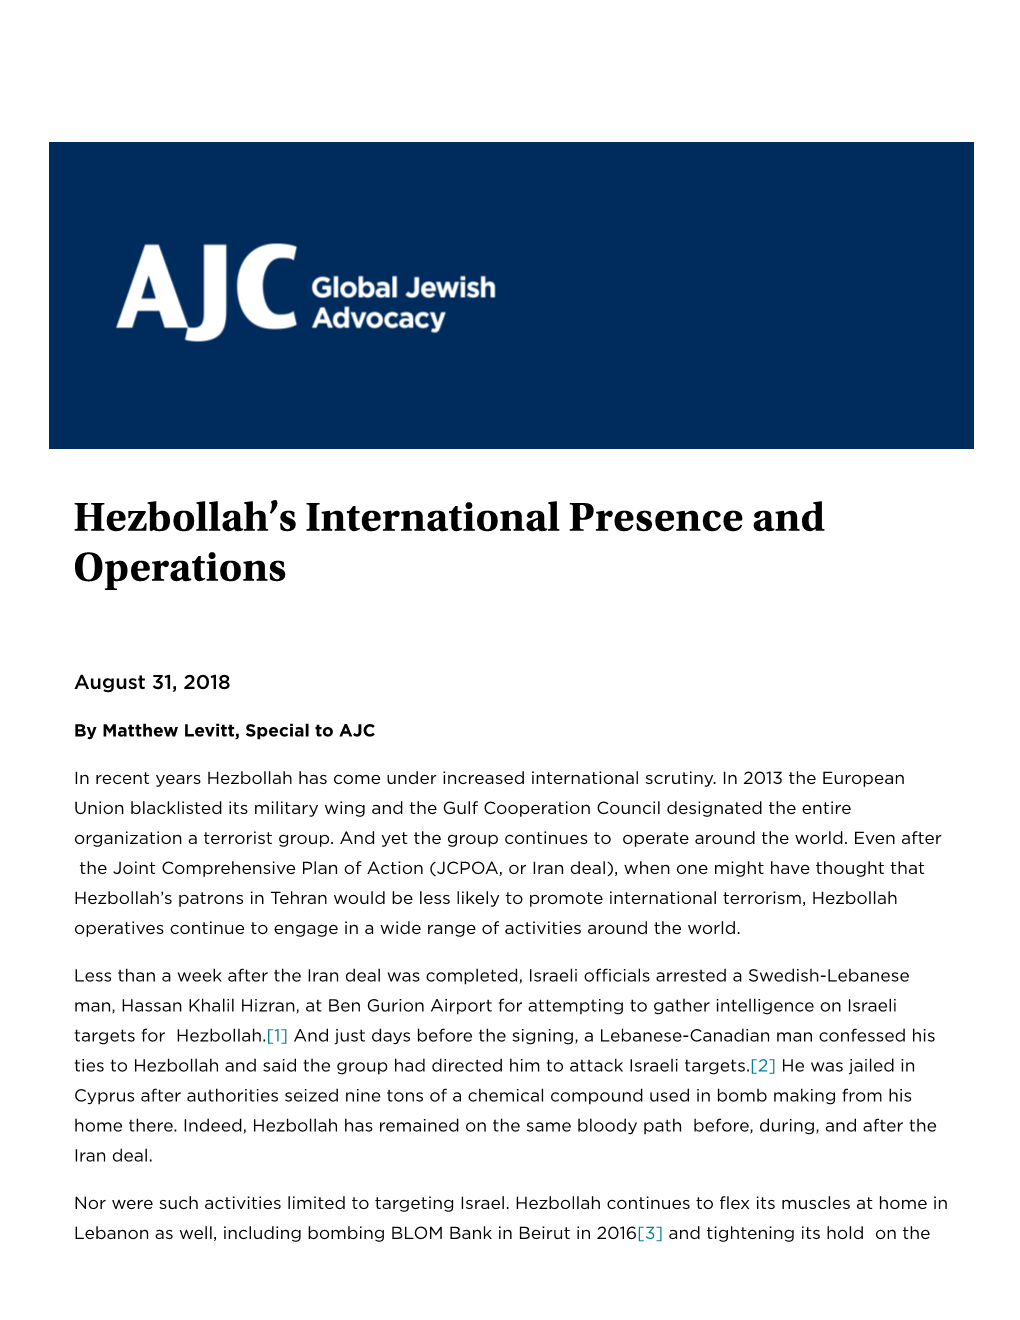 Hezbollah's International Presence and Operations